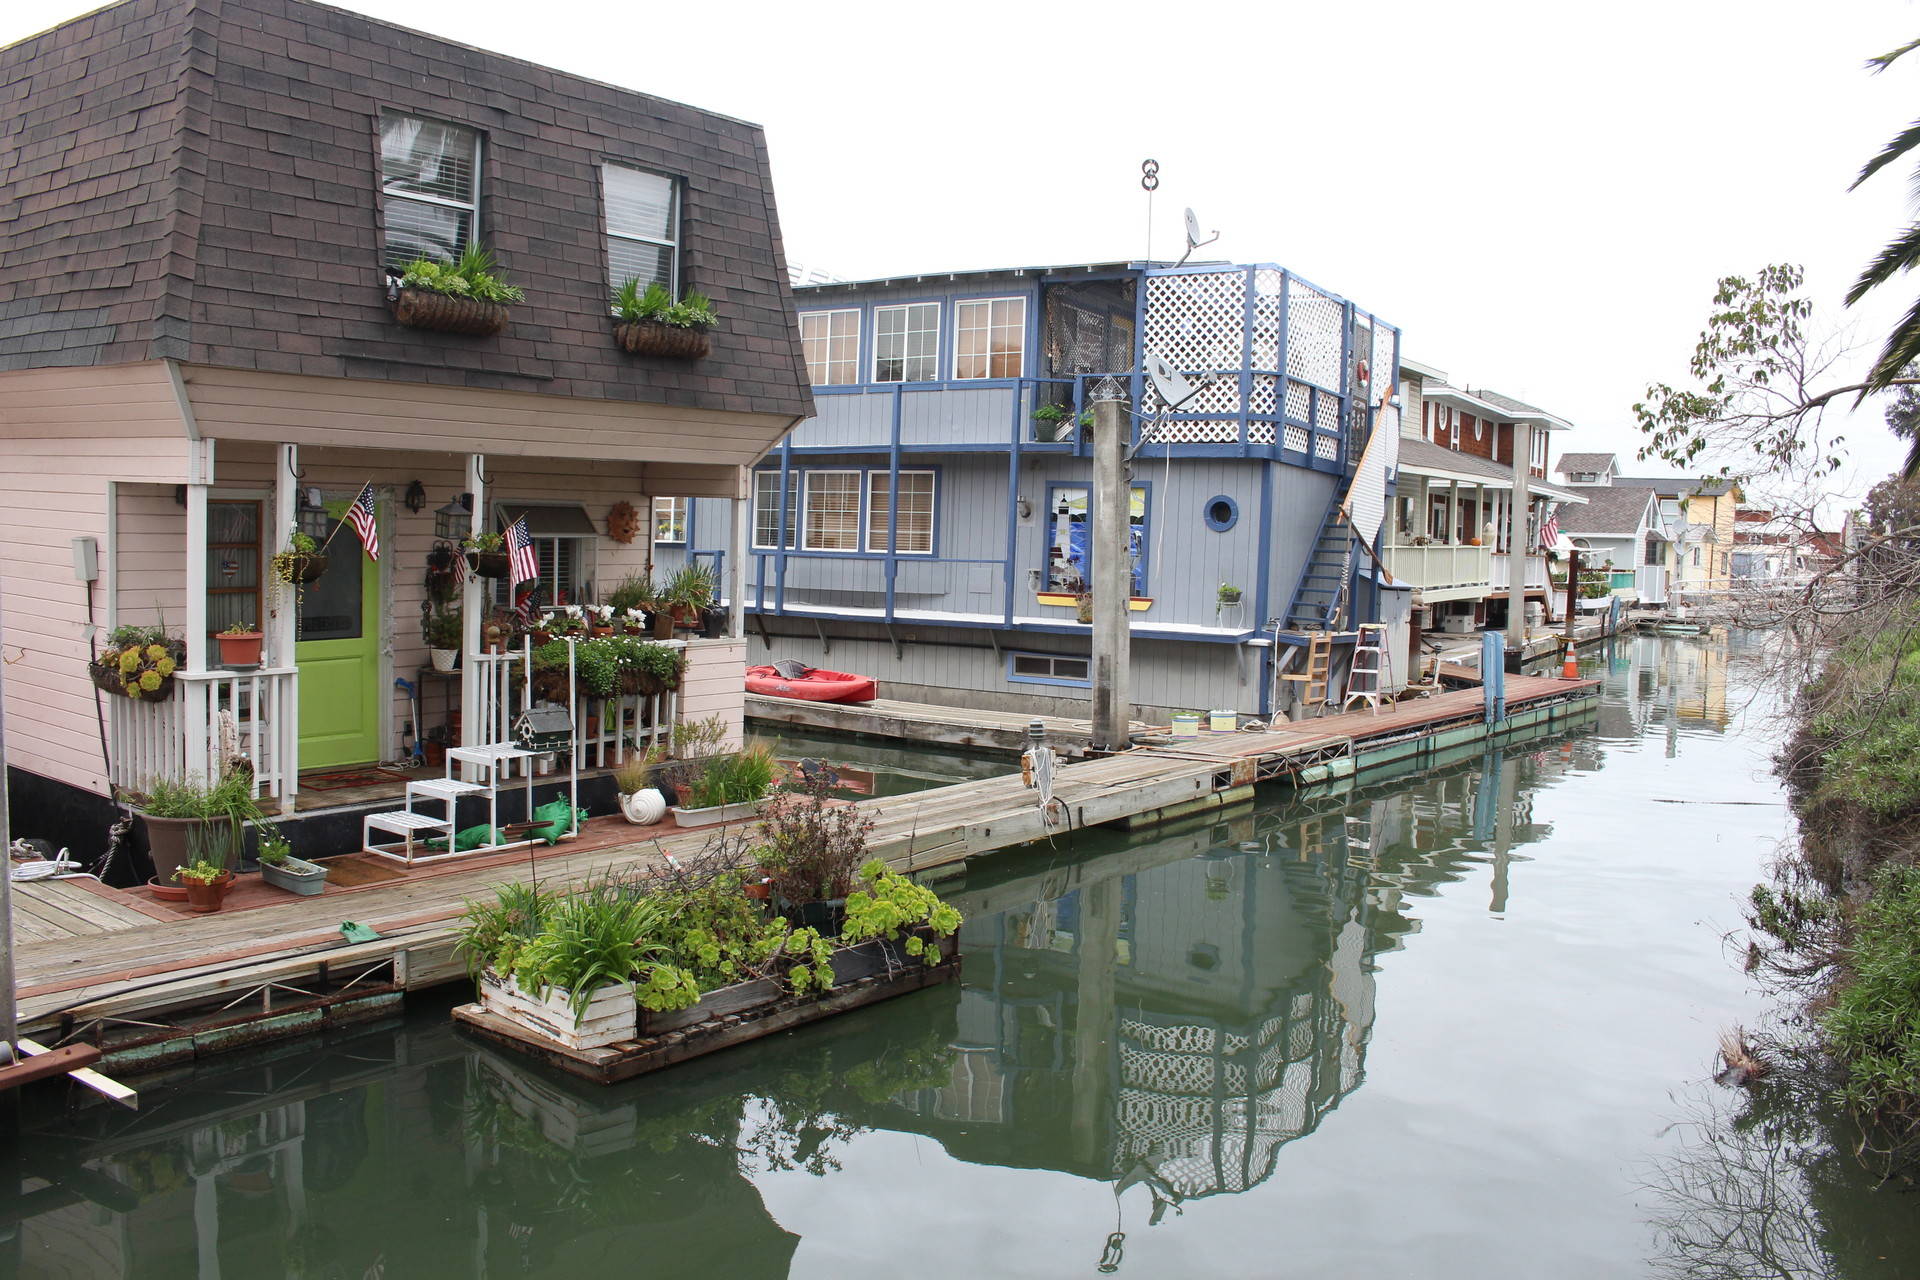 About 70 liveaboards are moored at Redwood City's Docktown Marina --  floating buildings or boats adapted for residential uses. The city is looking to potentially relocate residents. Farida Jhabvala Romero / KQED